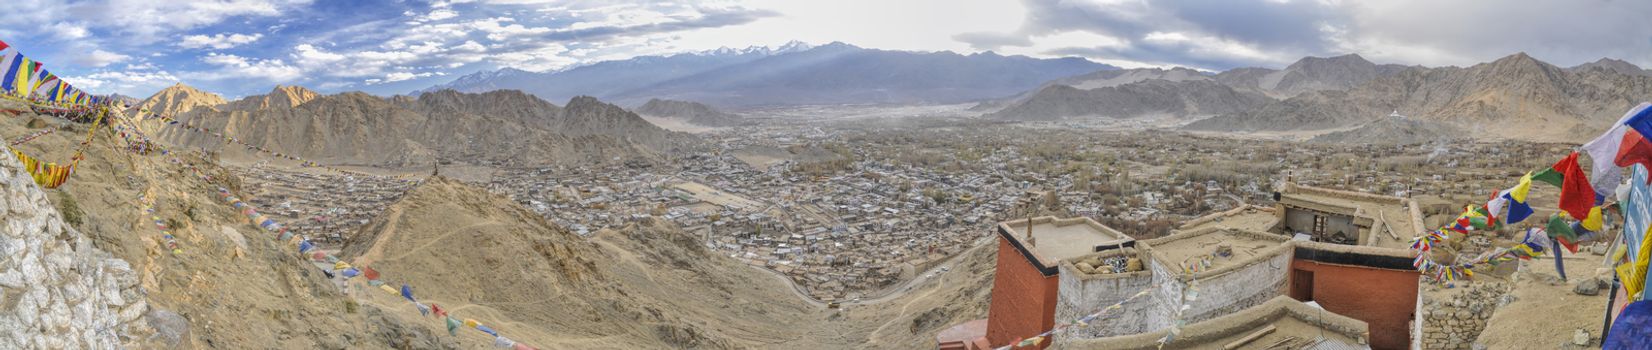 Scenic panoramic view from the Leh monastery complex in Ladakh, India